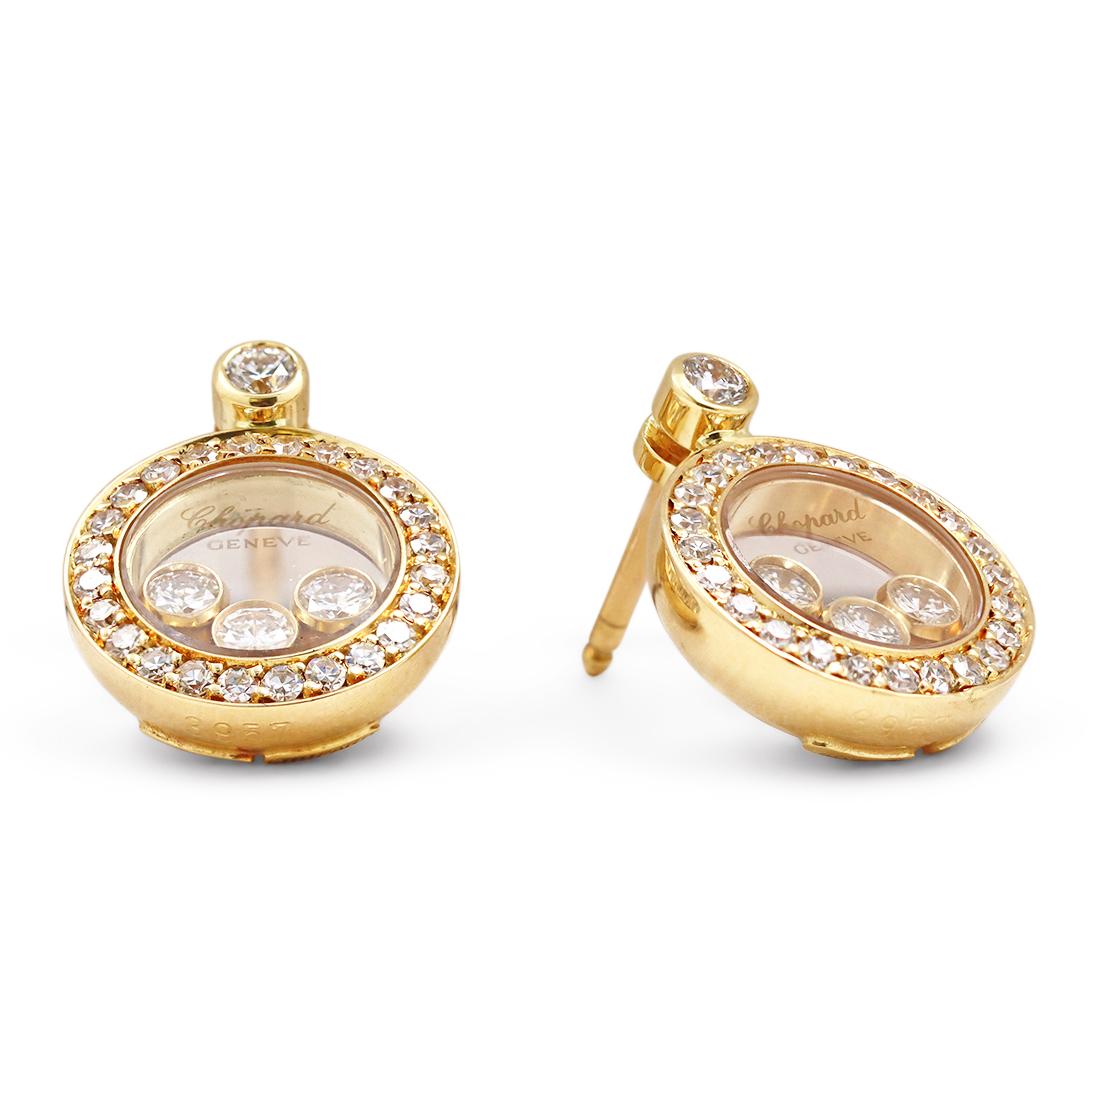 Authentic Chopard 'Happy Diamond' earrings crafted in 18 karat yellow gold. Inspired by the sparkling drops of water in a waterfall, three freely moving diamonds are held between two sapphire crystals on each of these lovely circular earrings.  An